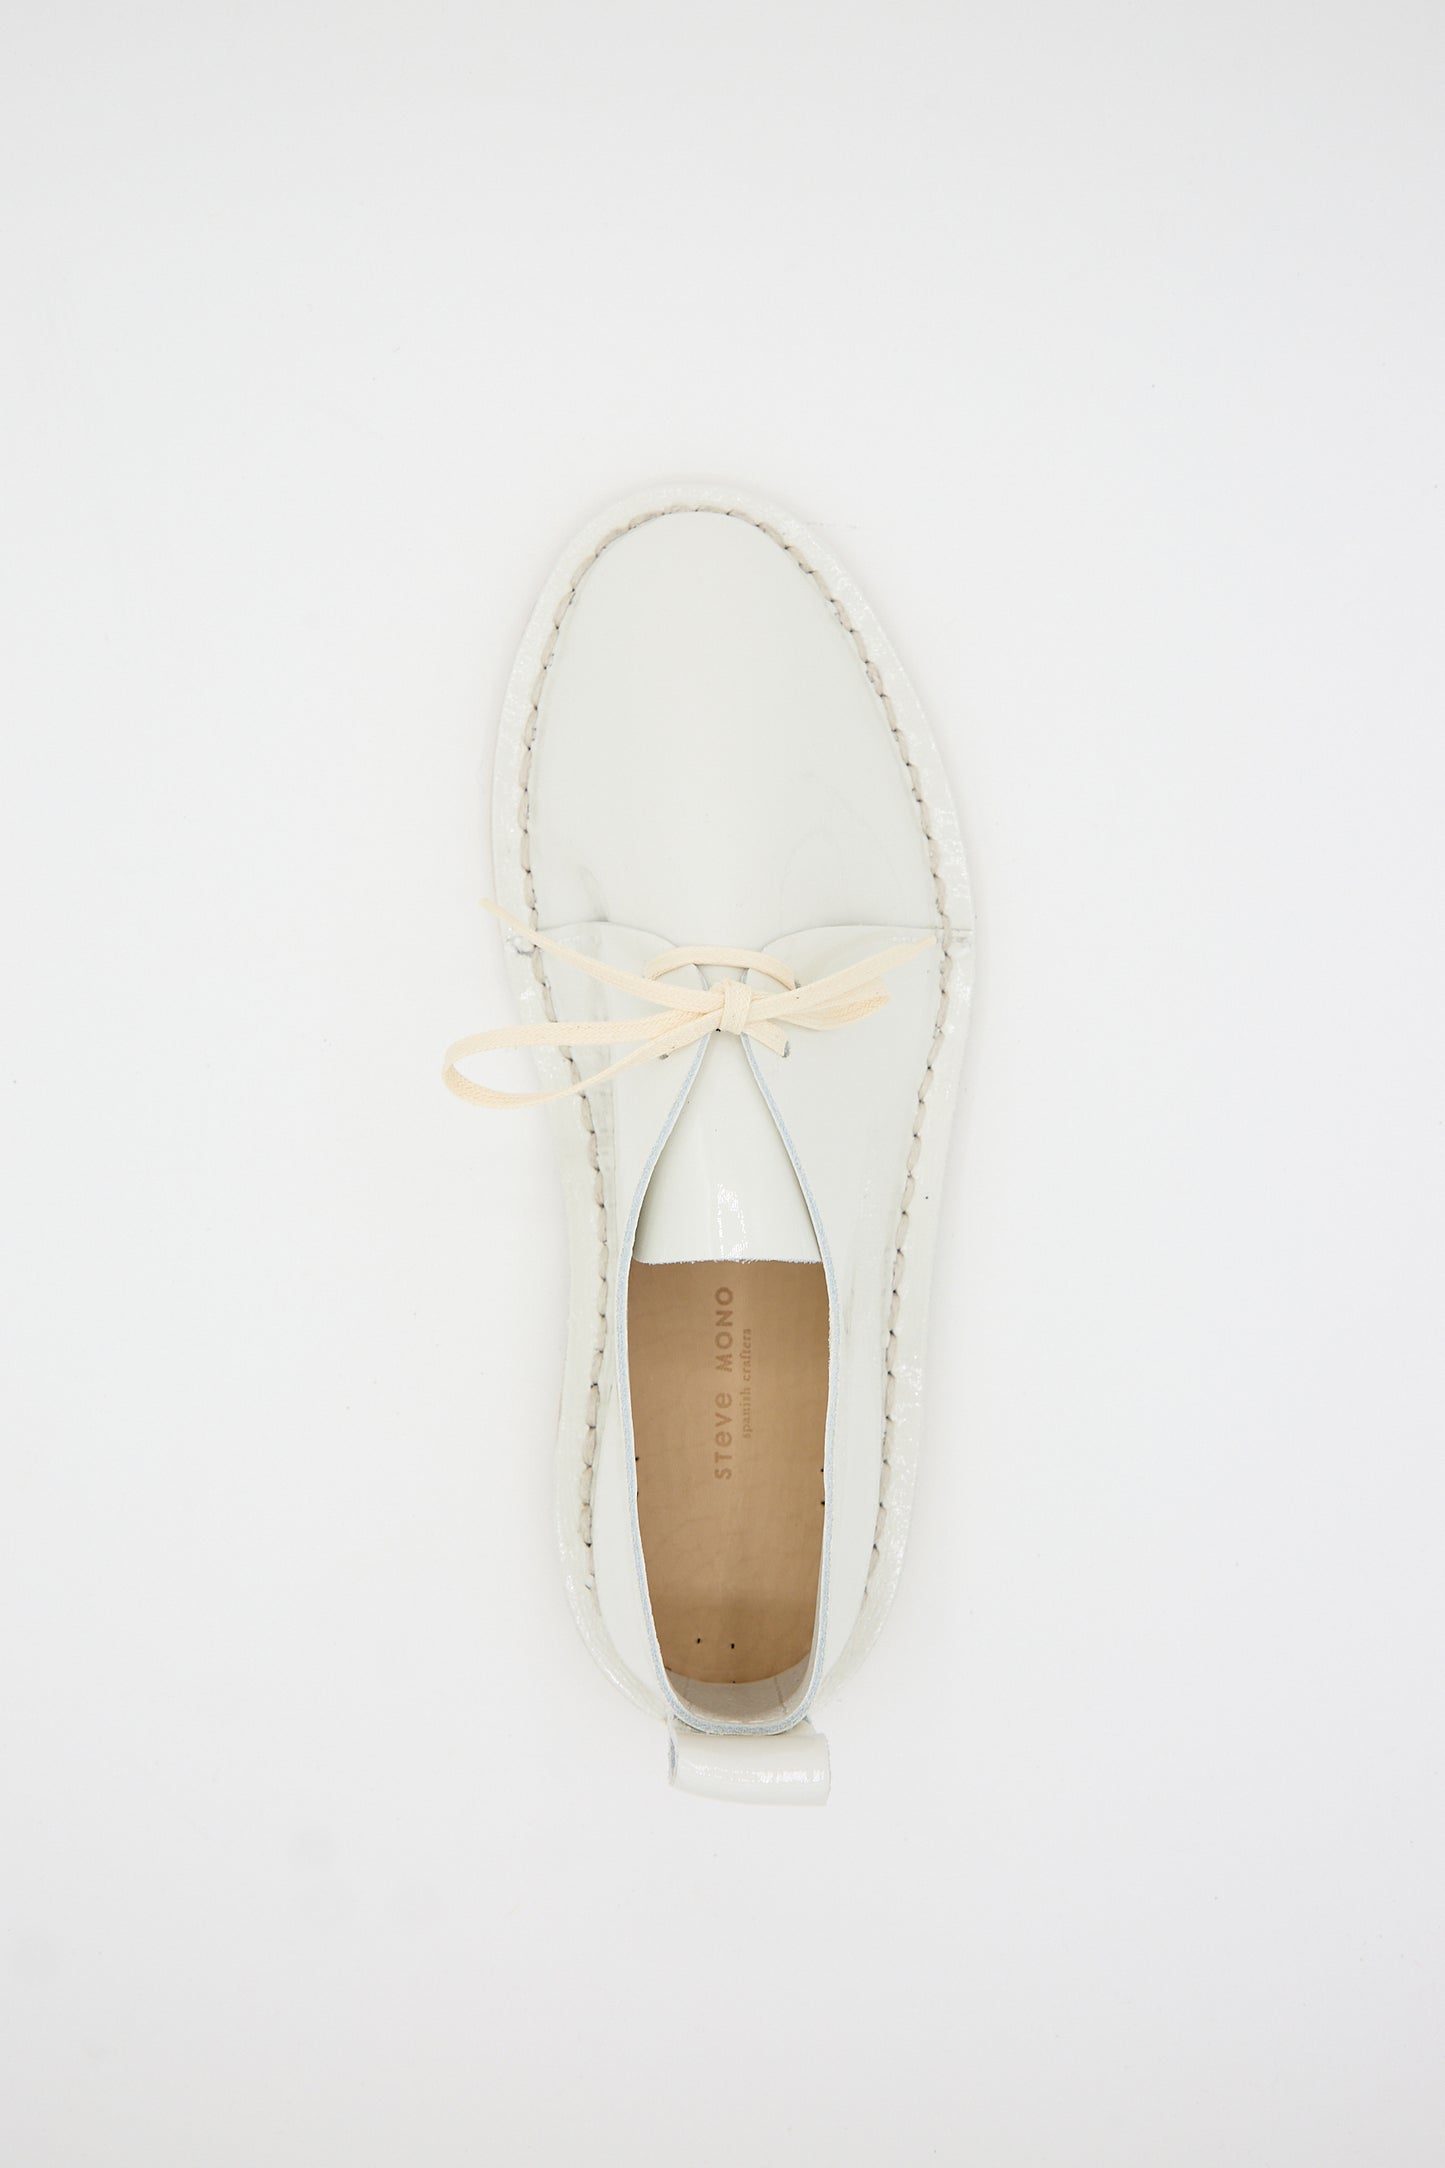 Top view of a single Steve Mono Patent Leather Derbie in White with cream laces and a tan insole against a white background, showcasing its sustainably made design.